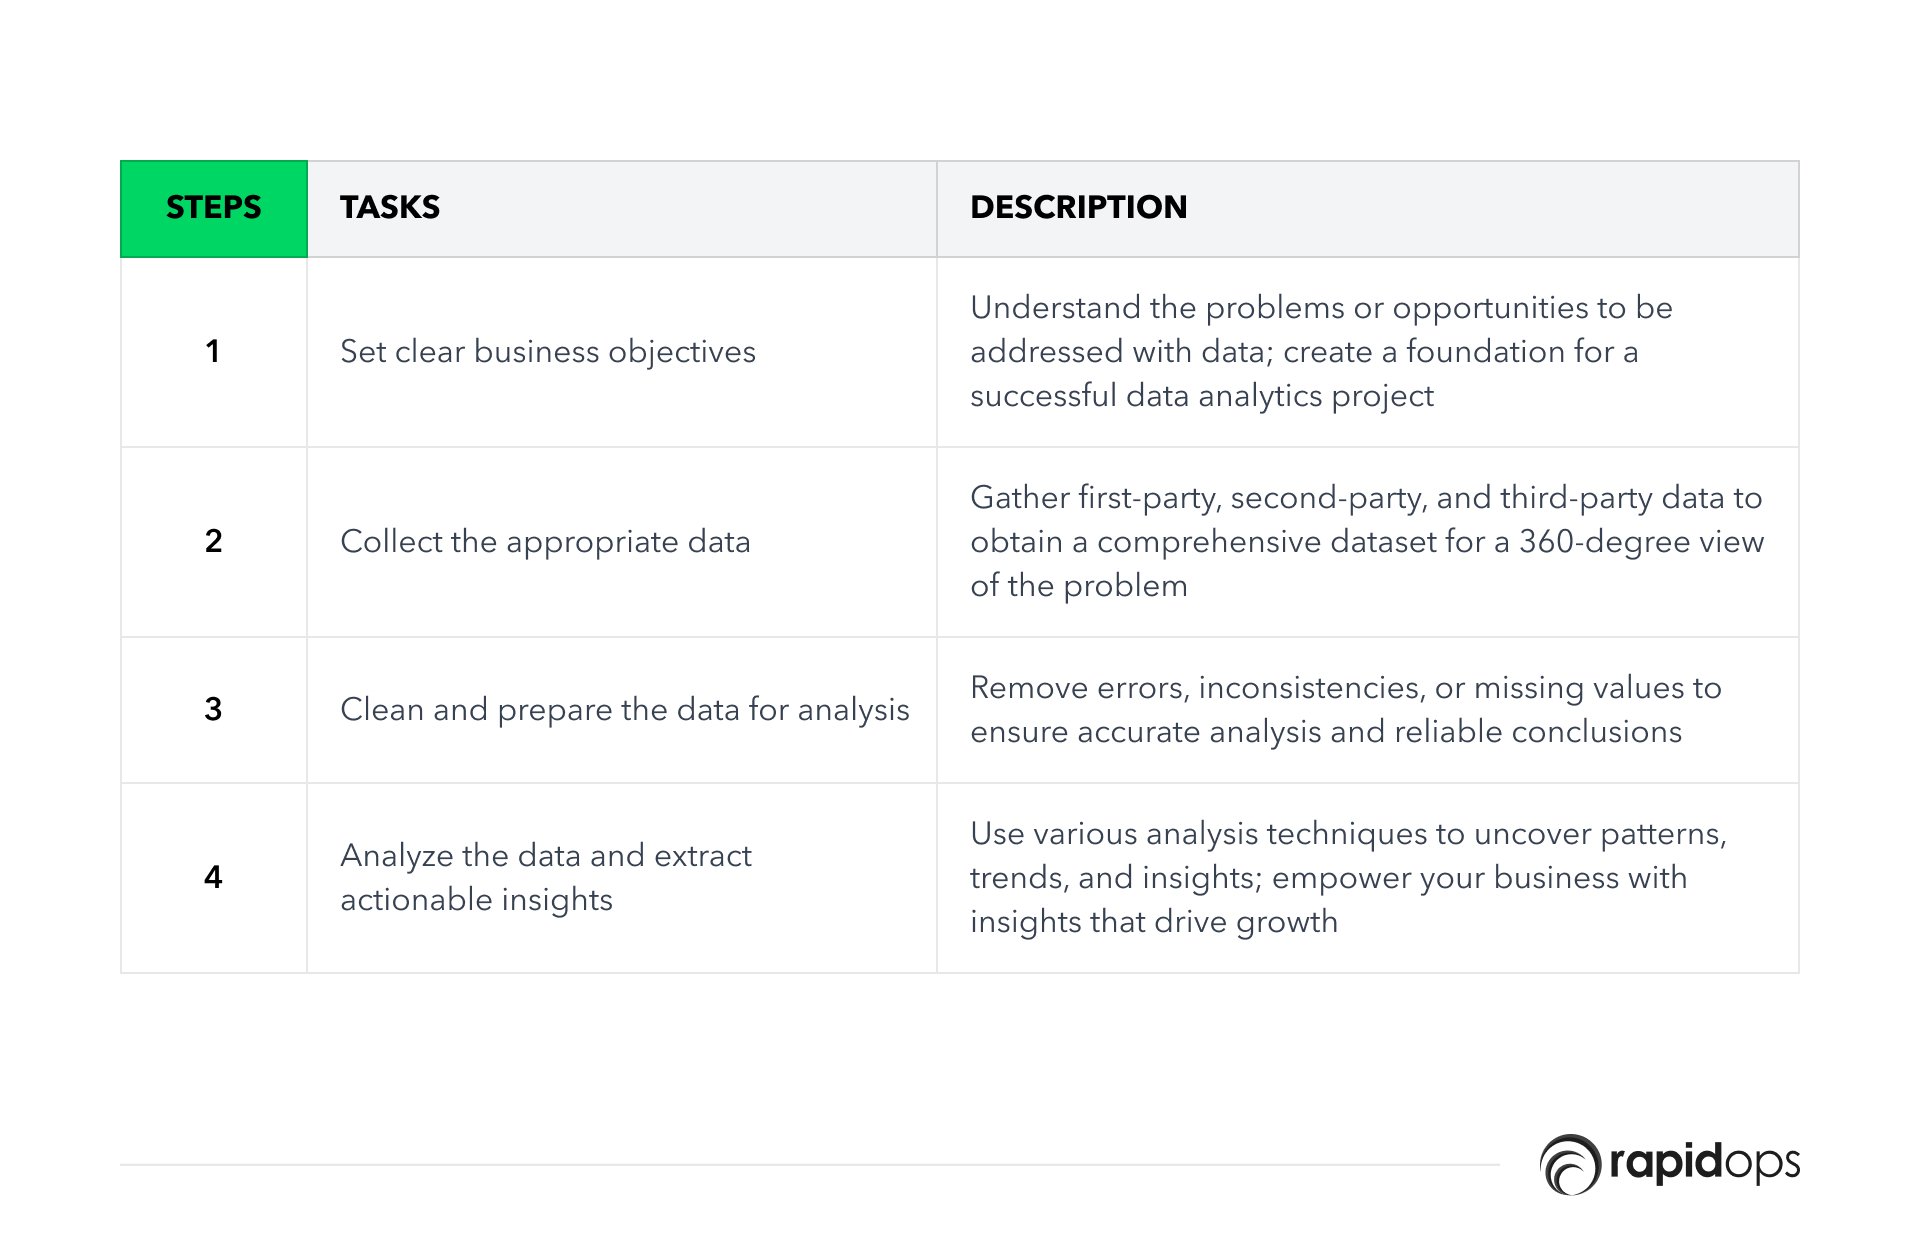 A typical data analytics process